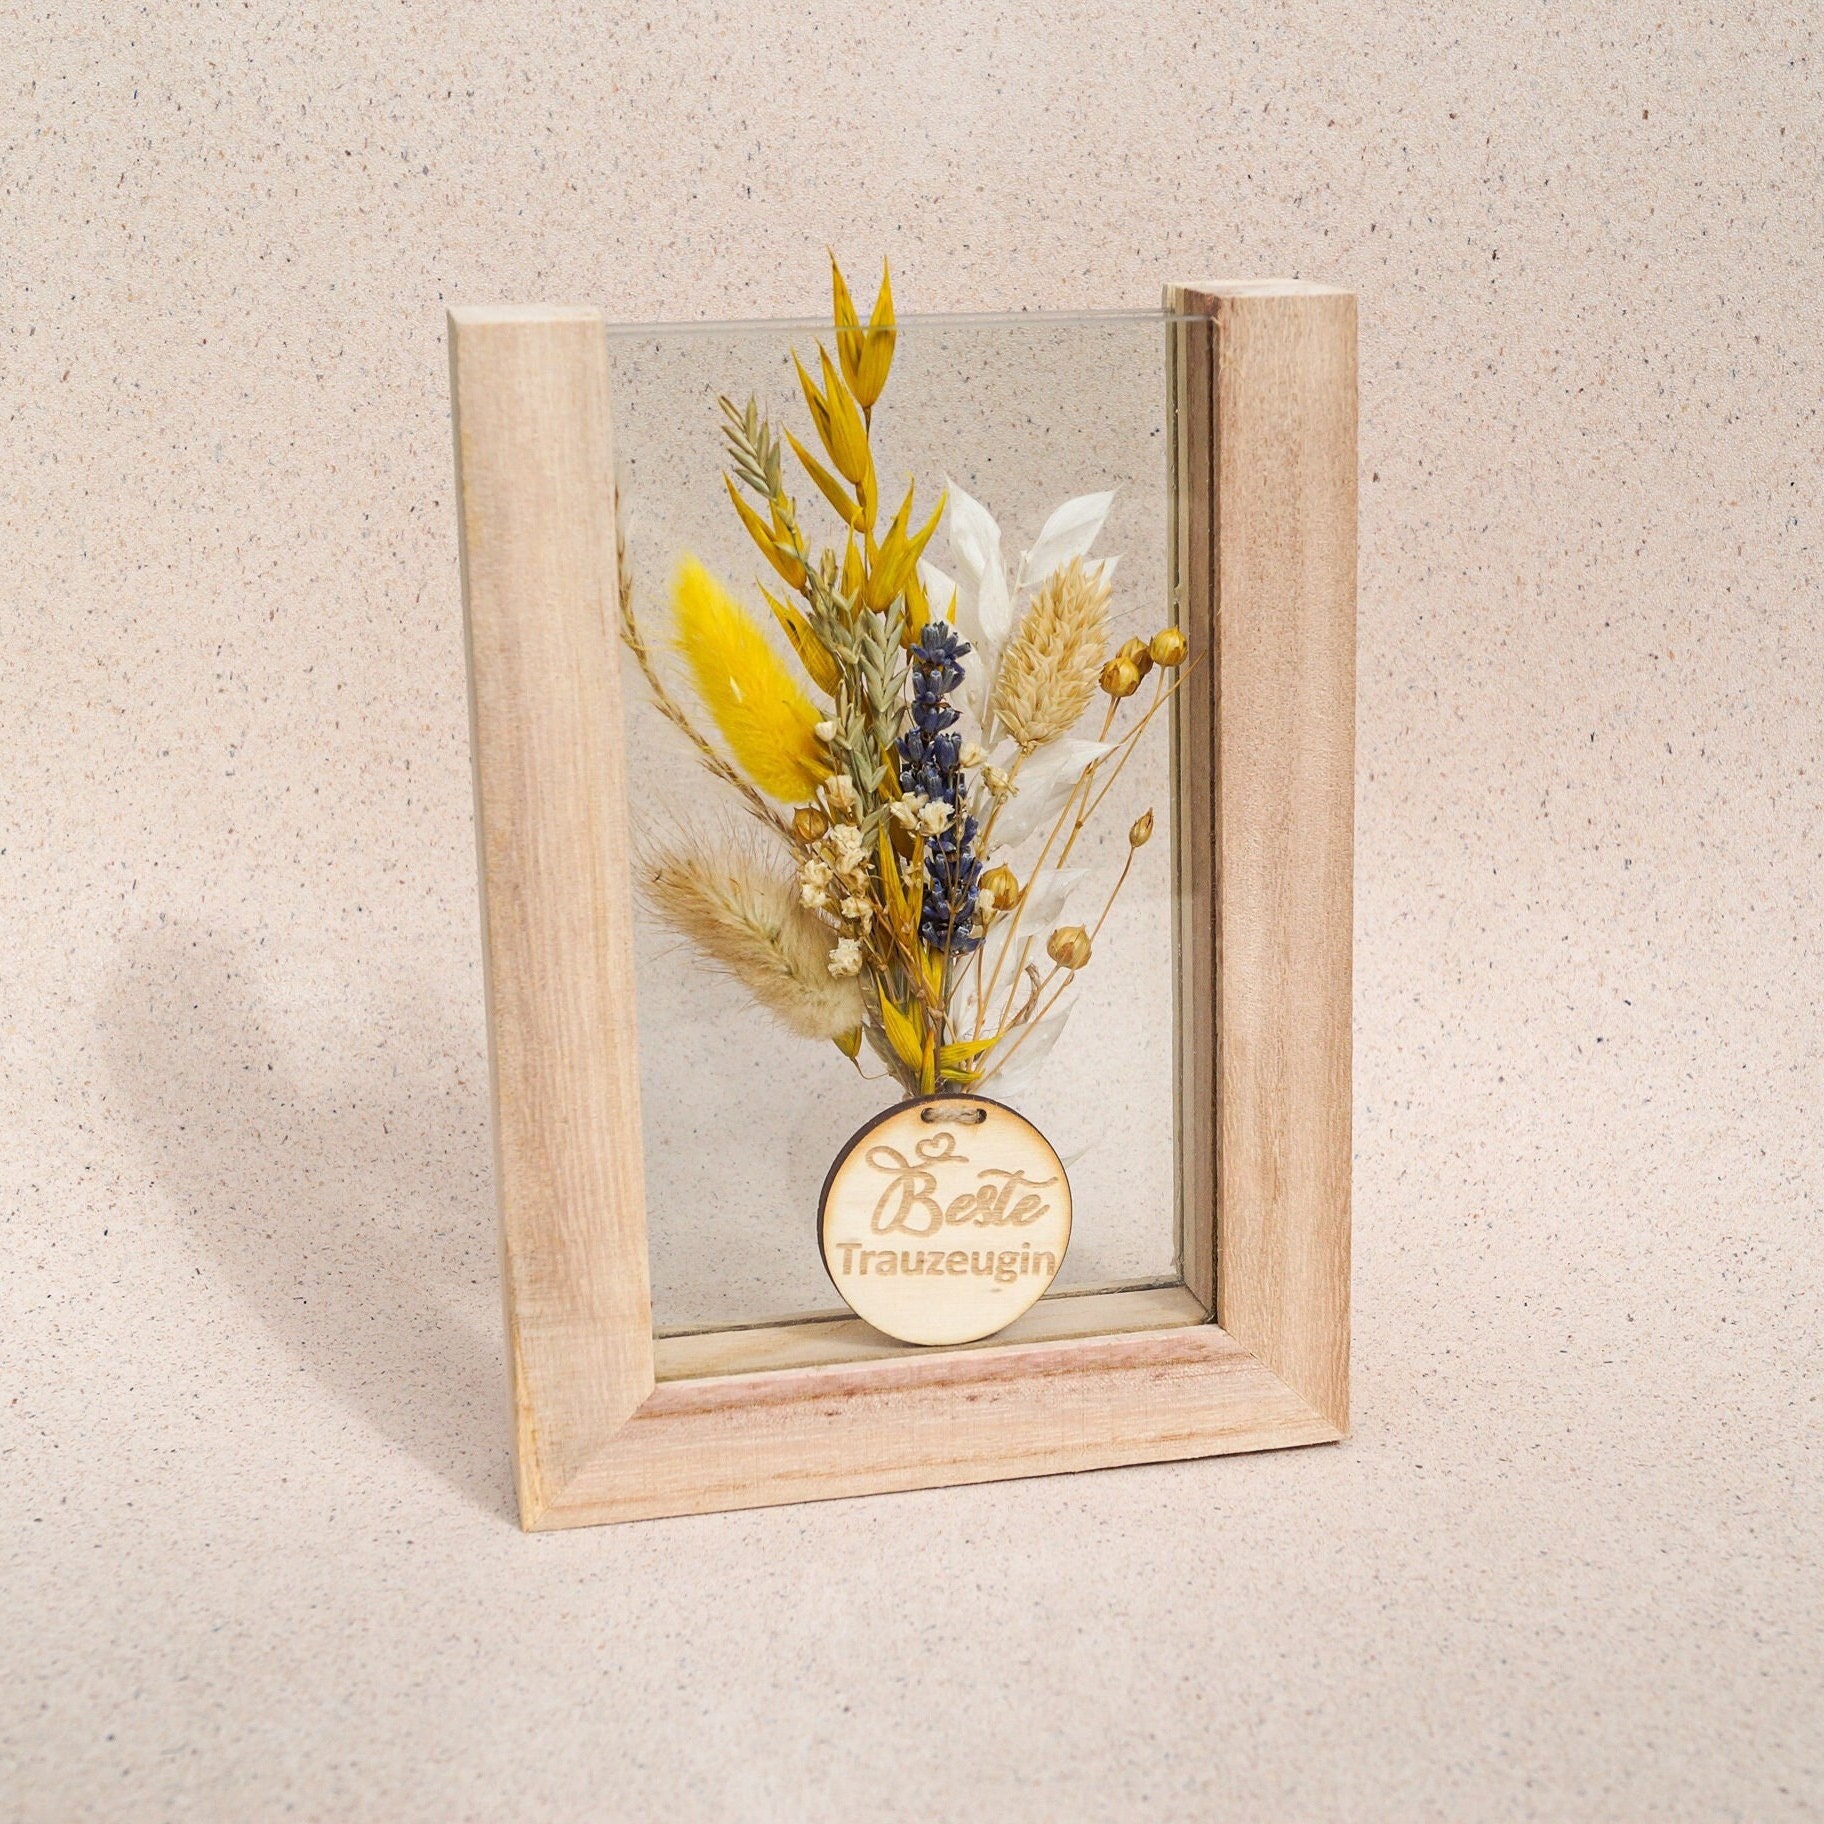 Press Dried Flower Glass Picture Frame,family Photo Display Stand